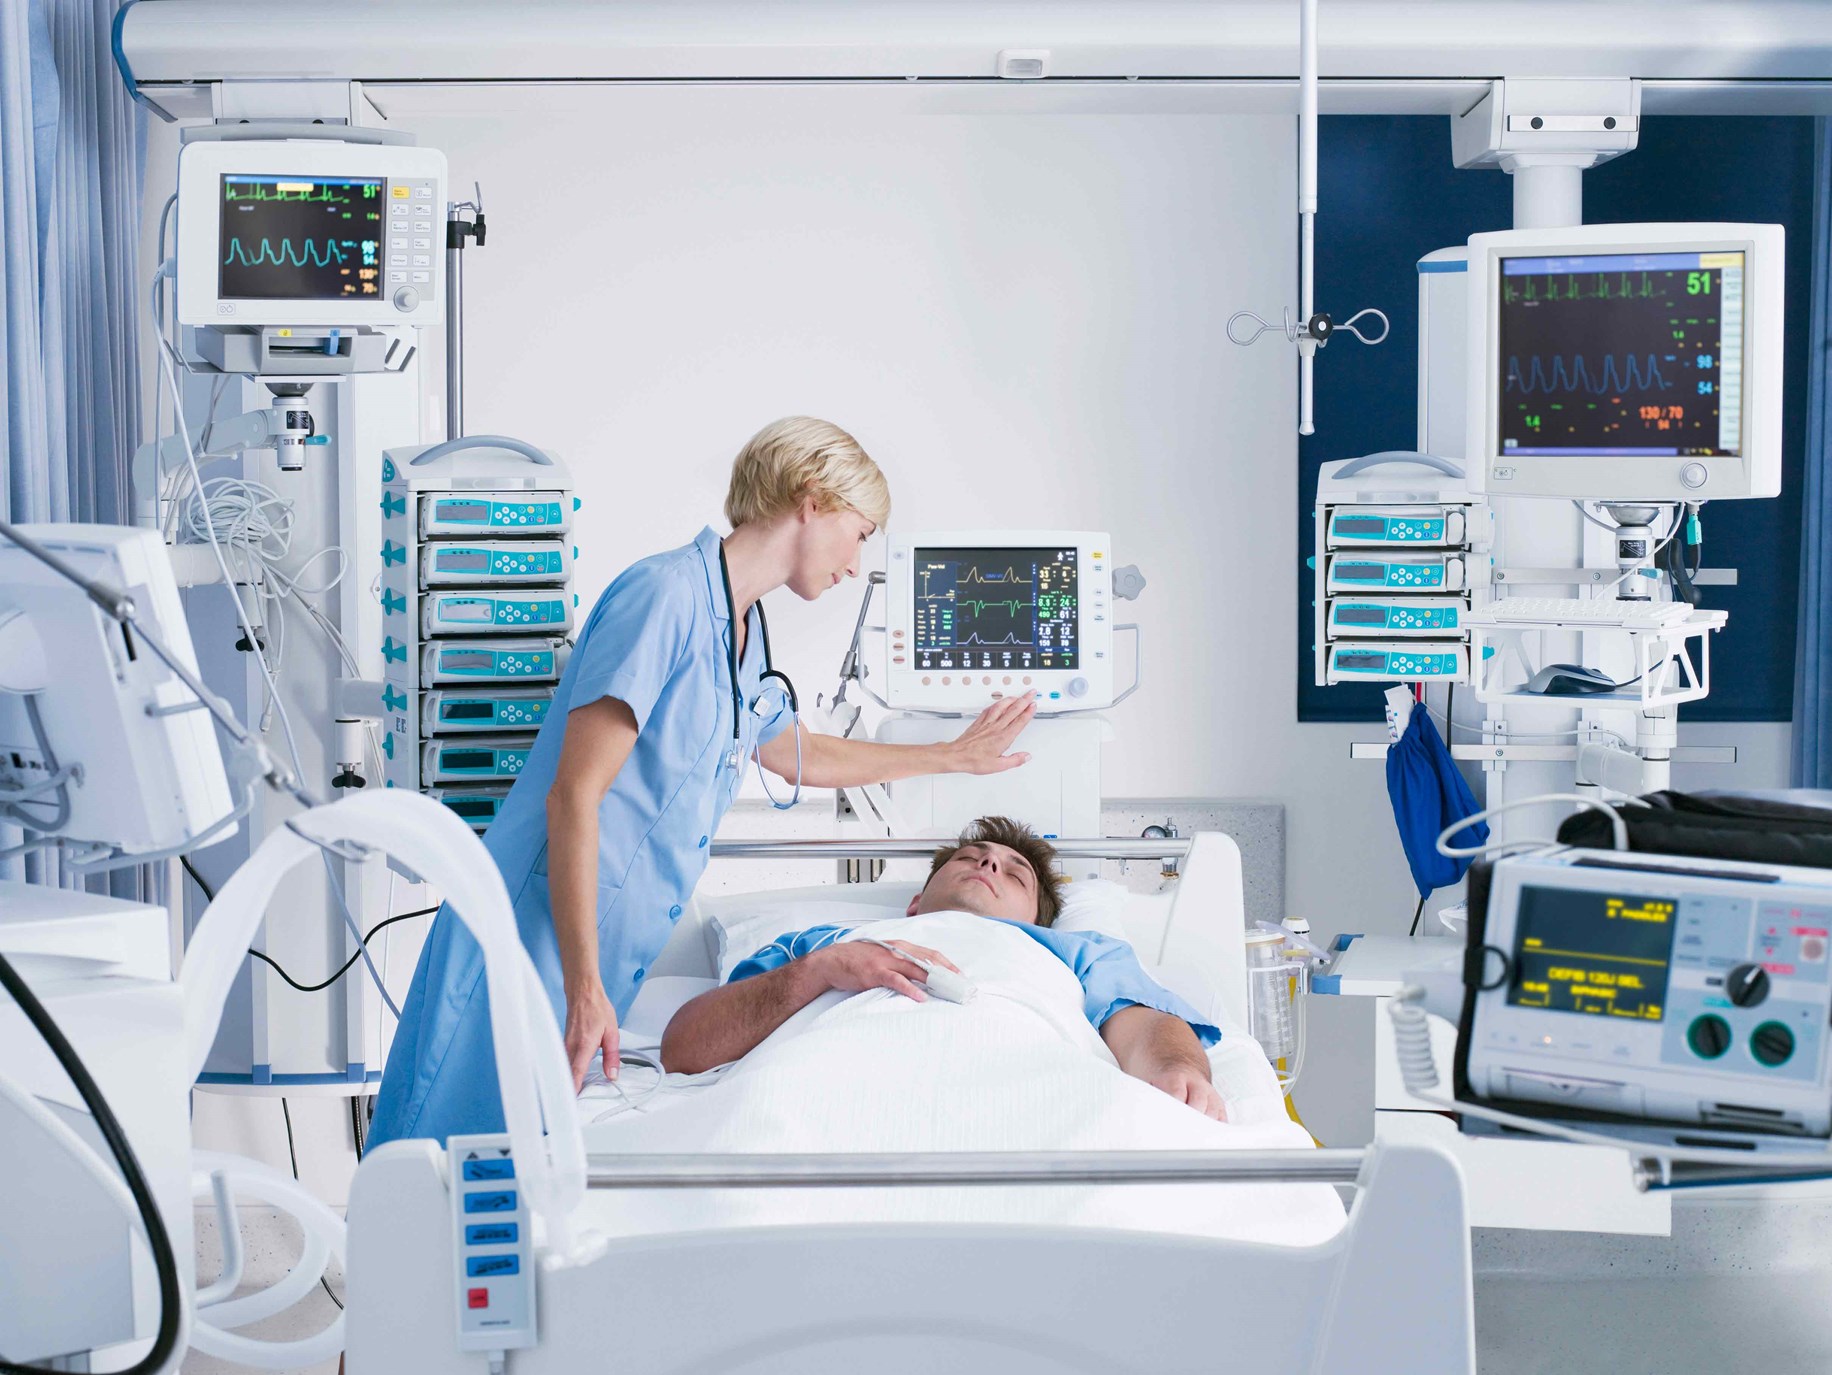 Rounding nurse checks on sleeping patient connected to multiple medical devices.